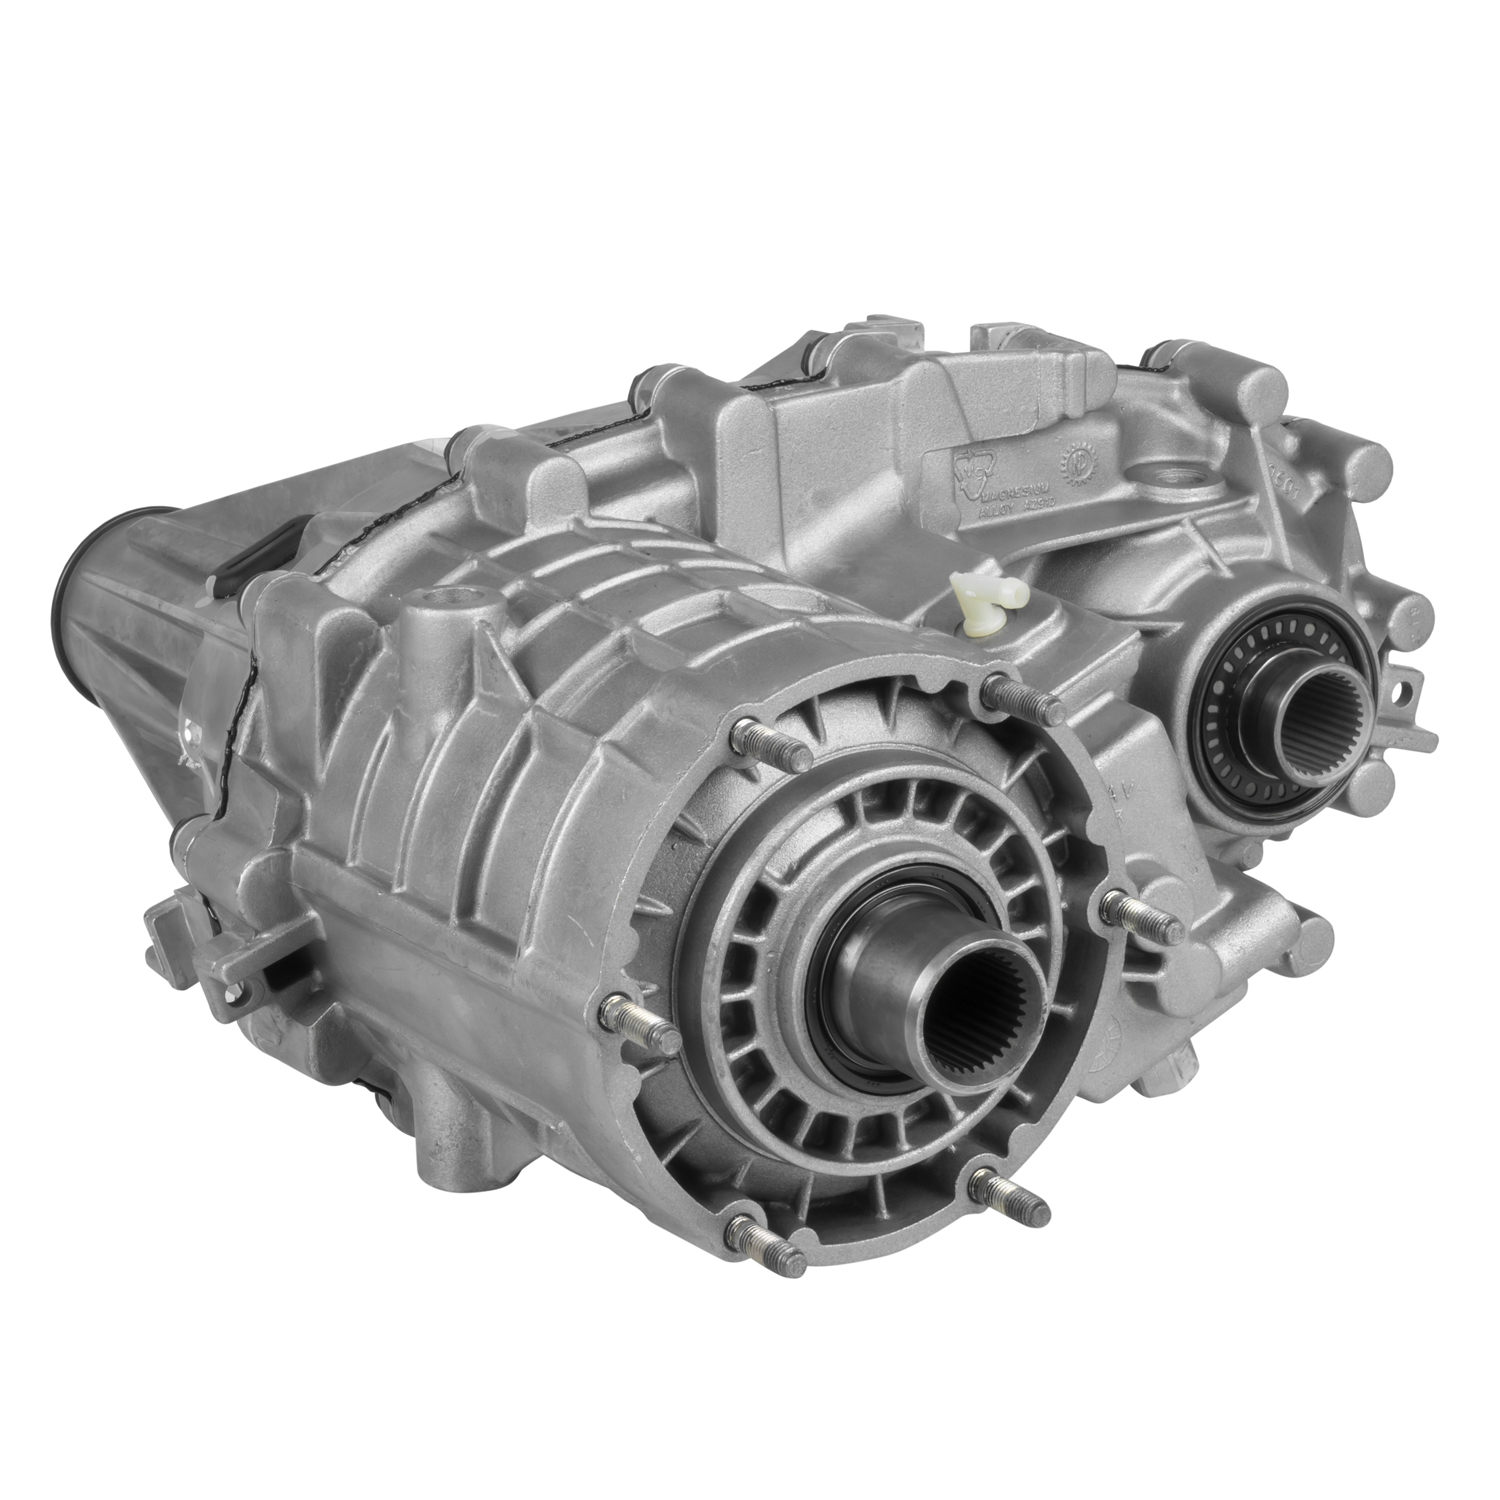 Zumbrota Remanufactured NP263 Transfer Case for 2001-2007 GM 2500/3500 Series